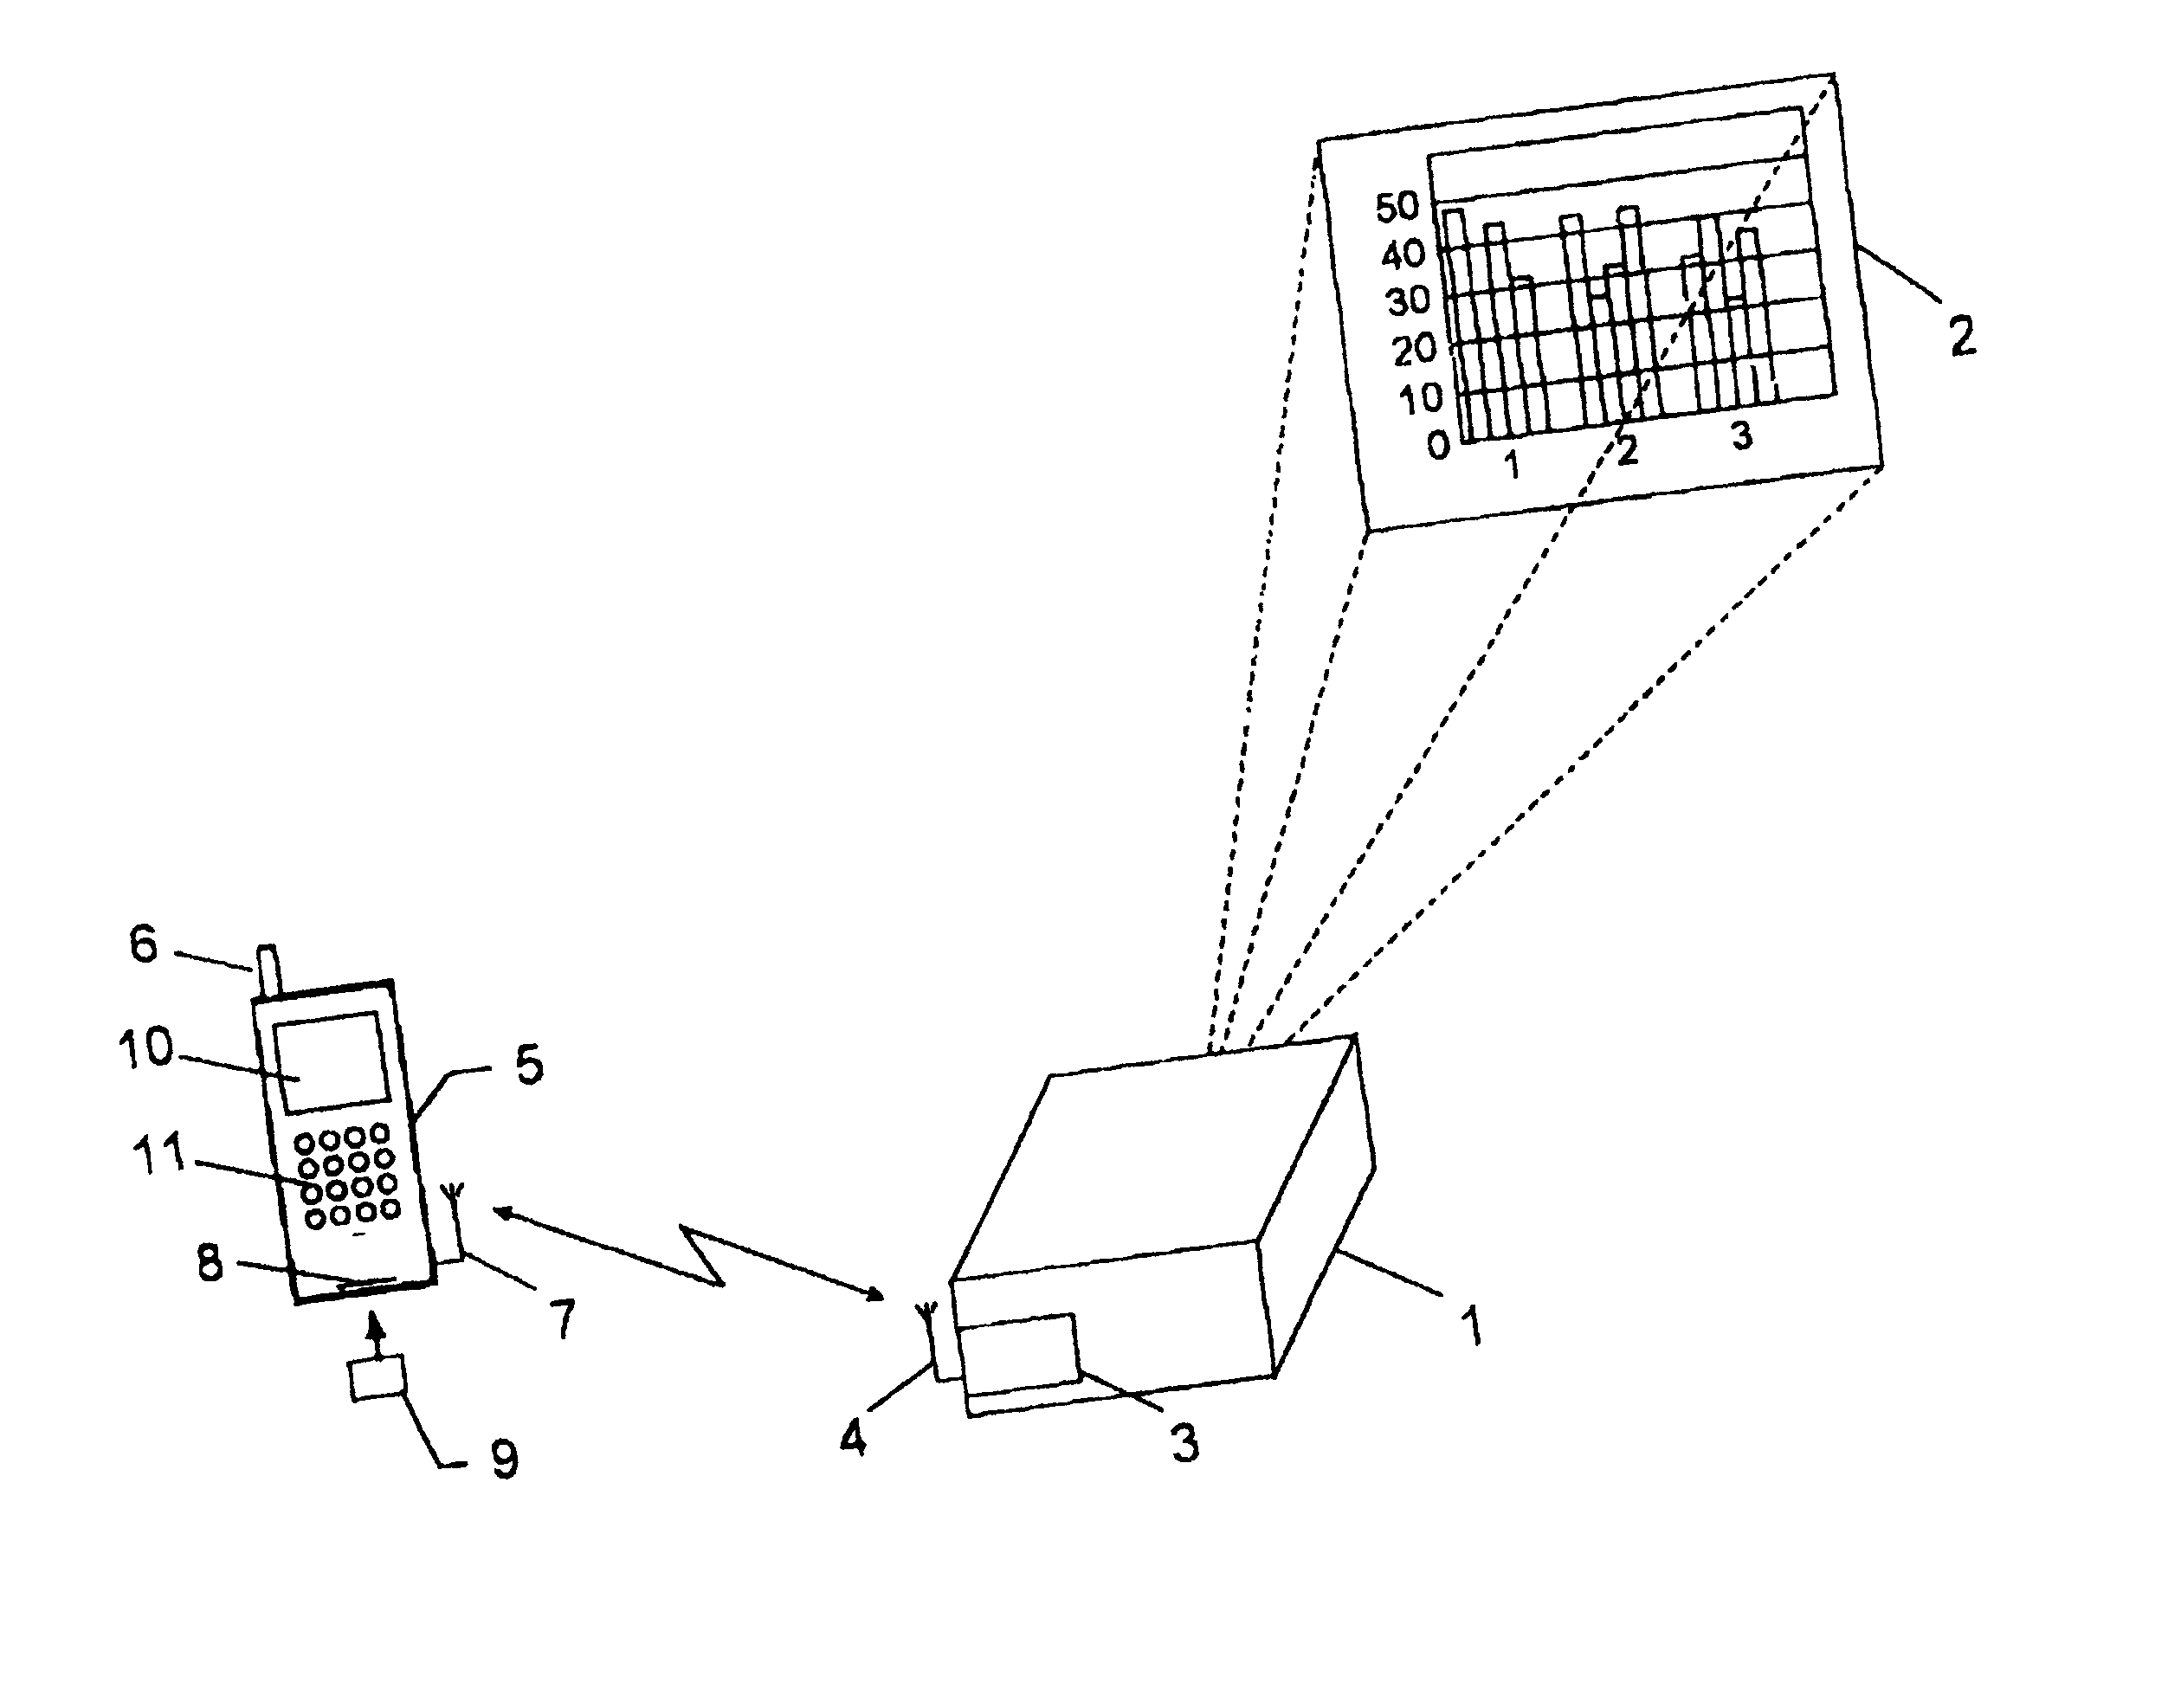 Method of controlling a display device, a display system, a display apparatus, and an electronic accessory device for controlling a display device